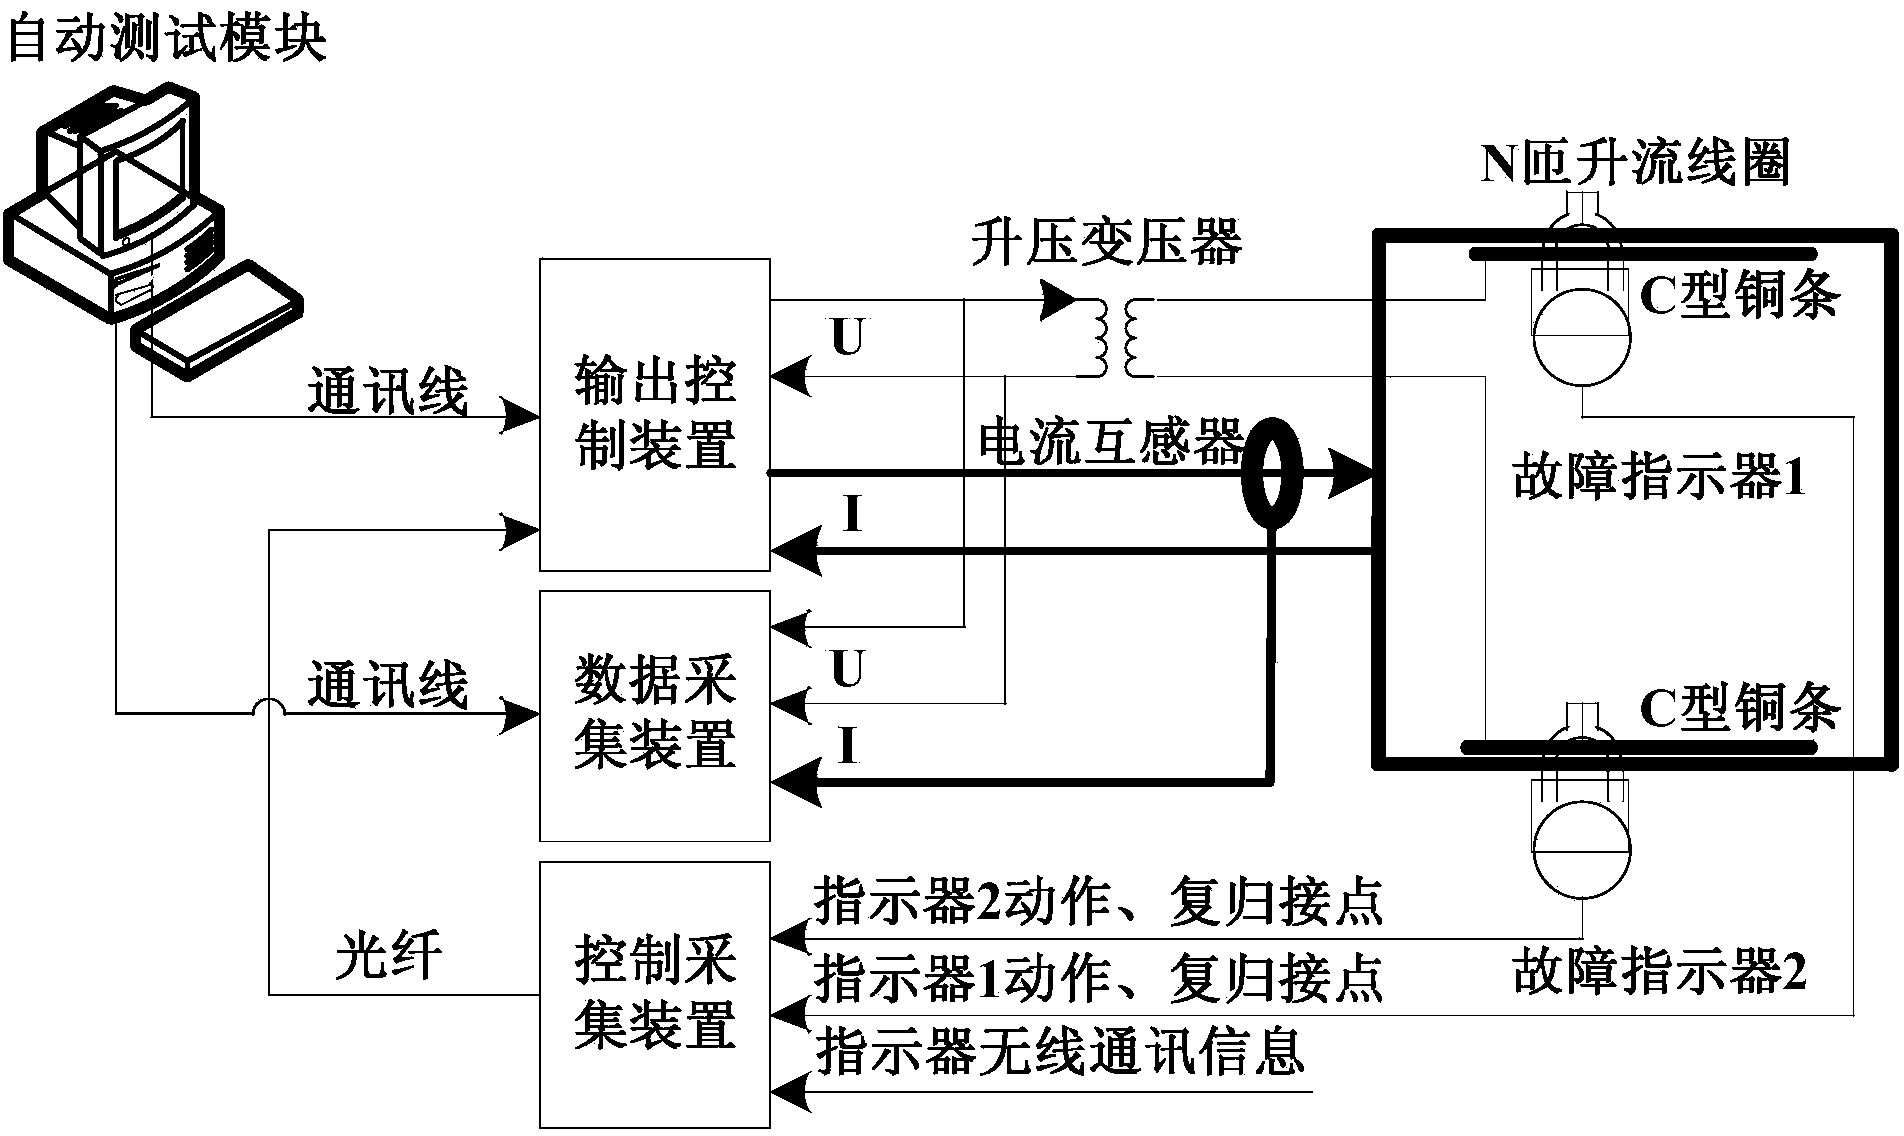 Automatic detection system for fault indicators for distributing line